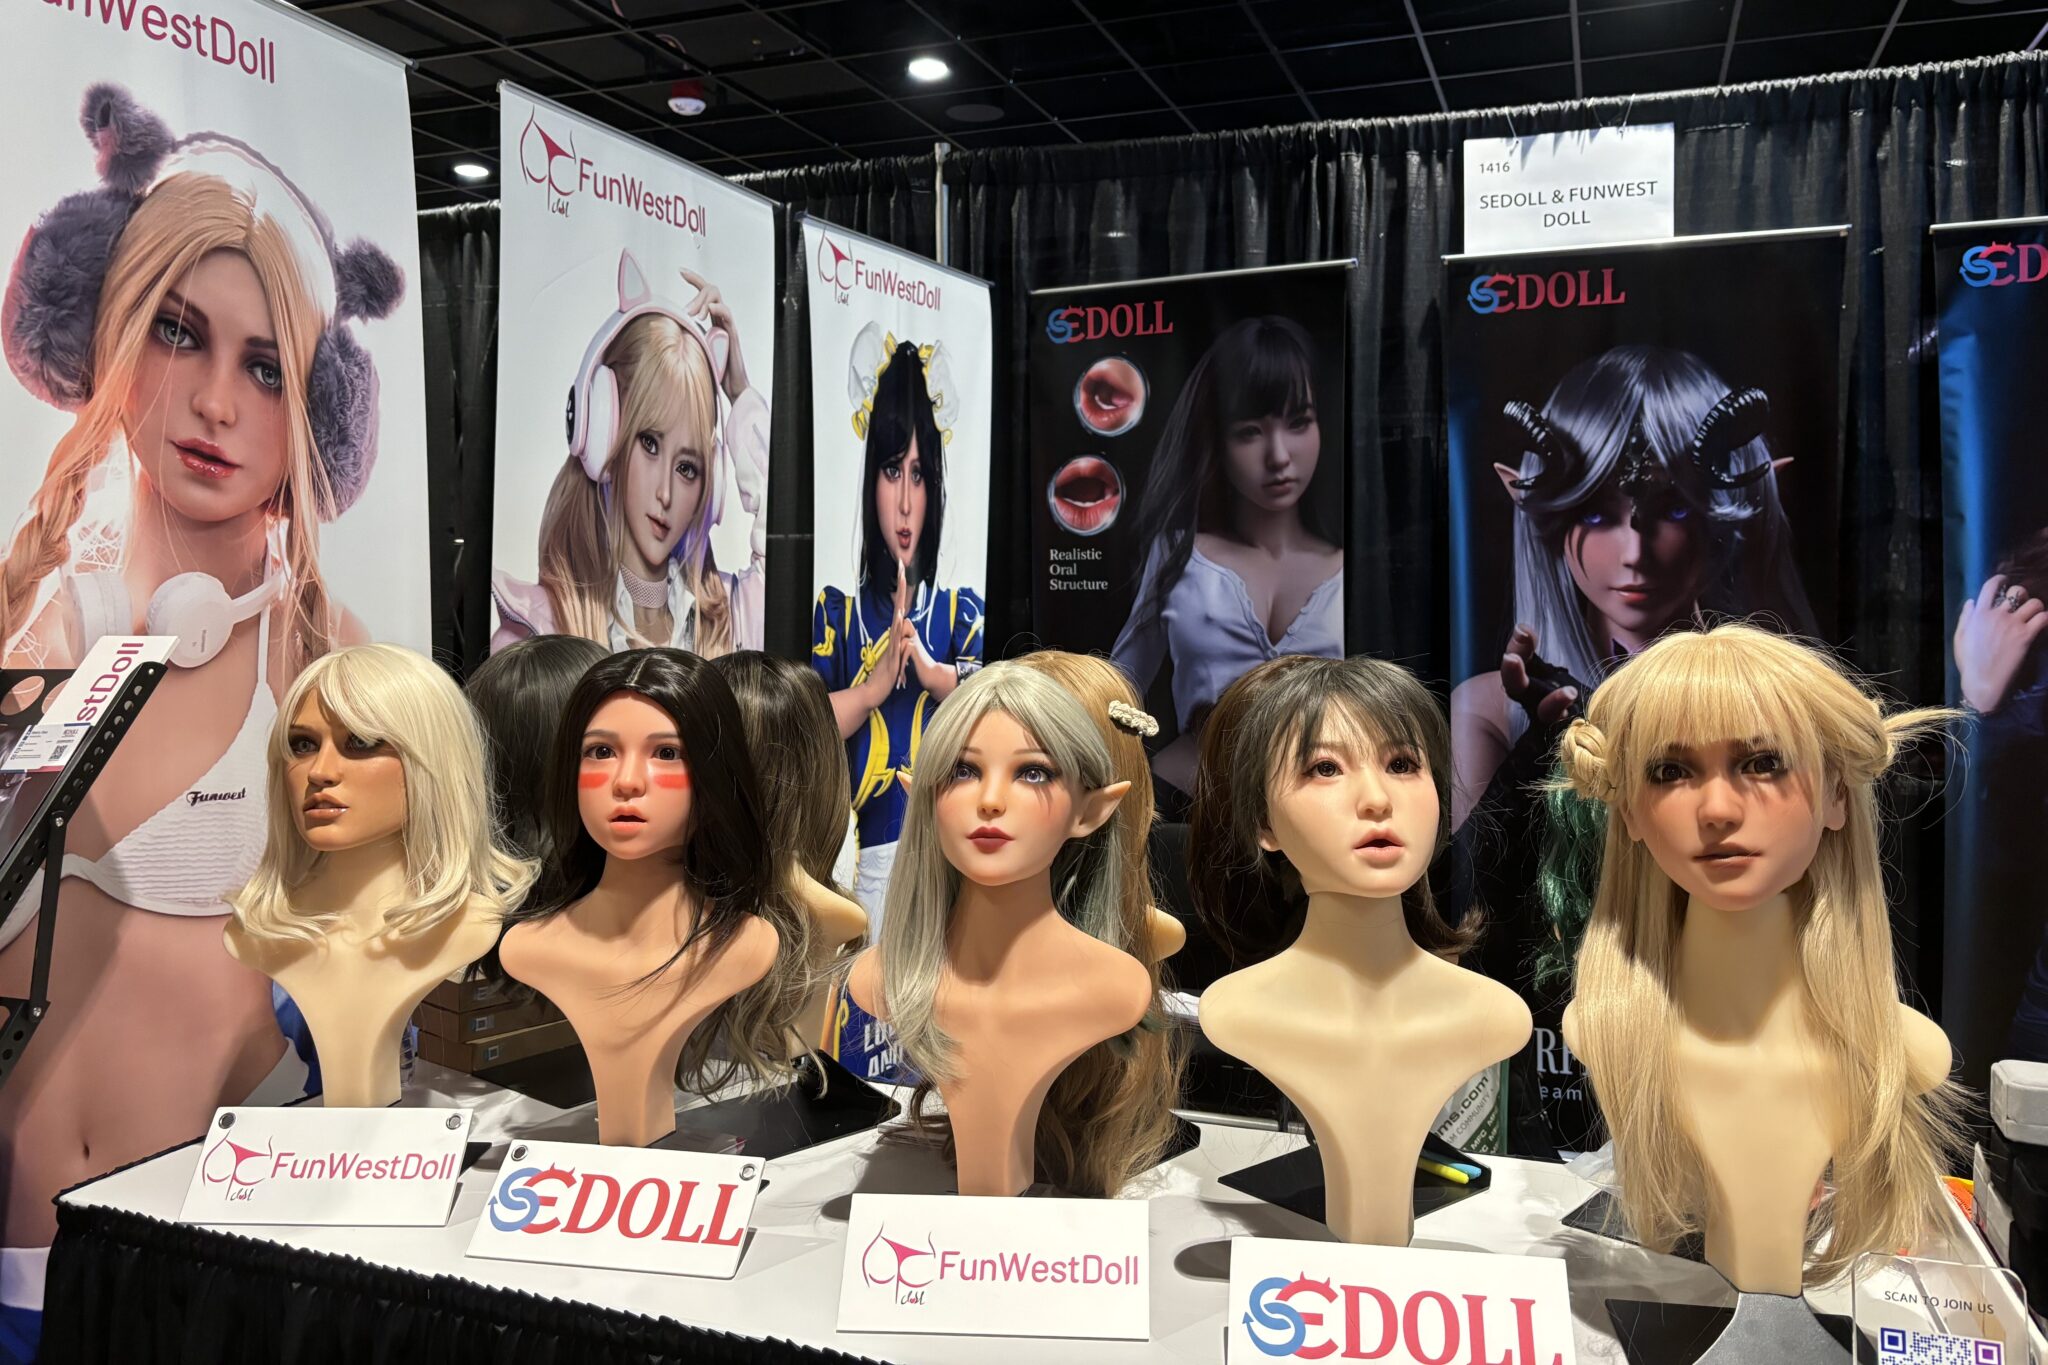 SE Doll booth at AVP Expo